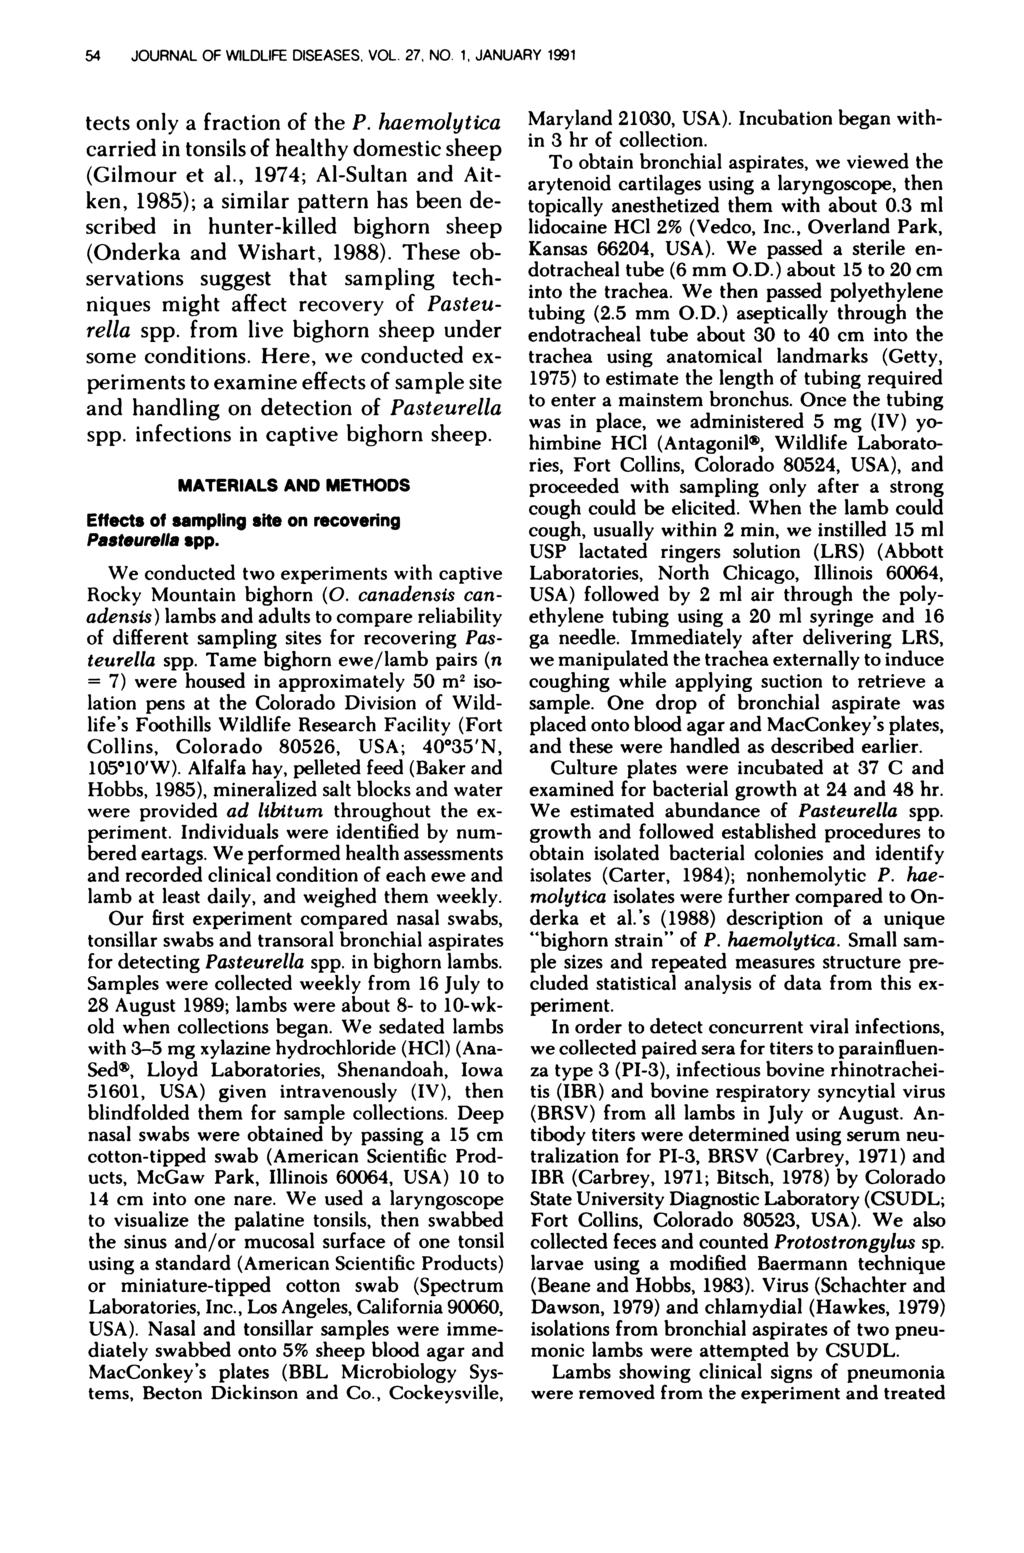 54 JOURNAL OF WILDLIFE DISEASES, VOL. 27, NO. 1, JANUARY 1991 tects only a fraction of the P. haemolytica carried in tonsils of hea!thy domestic sheep (Gilmour et a!